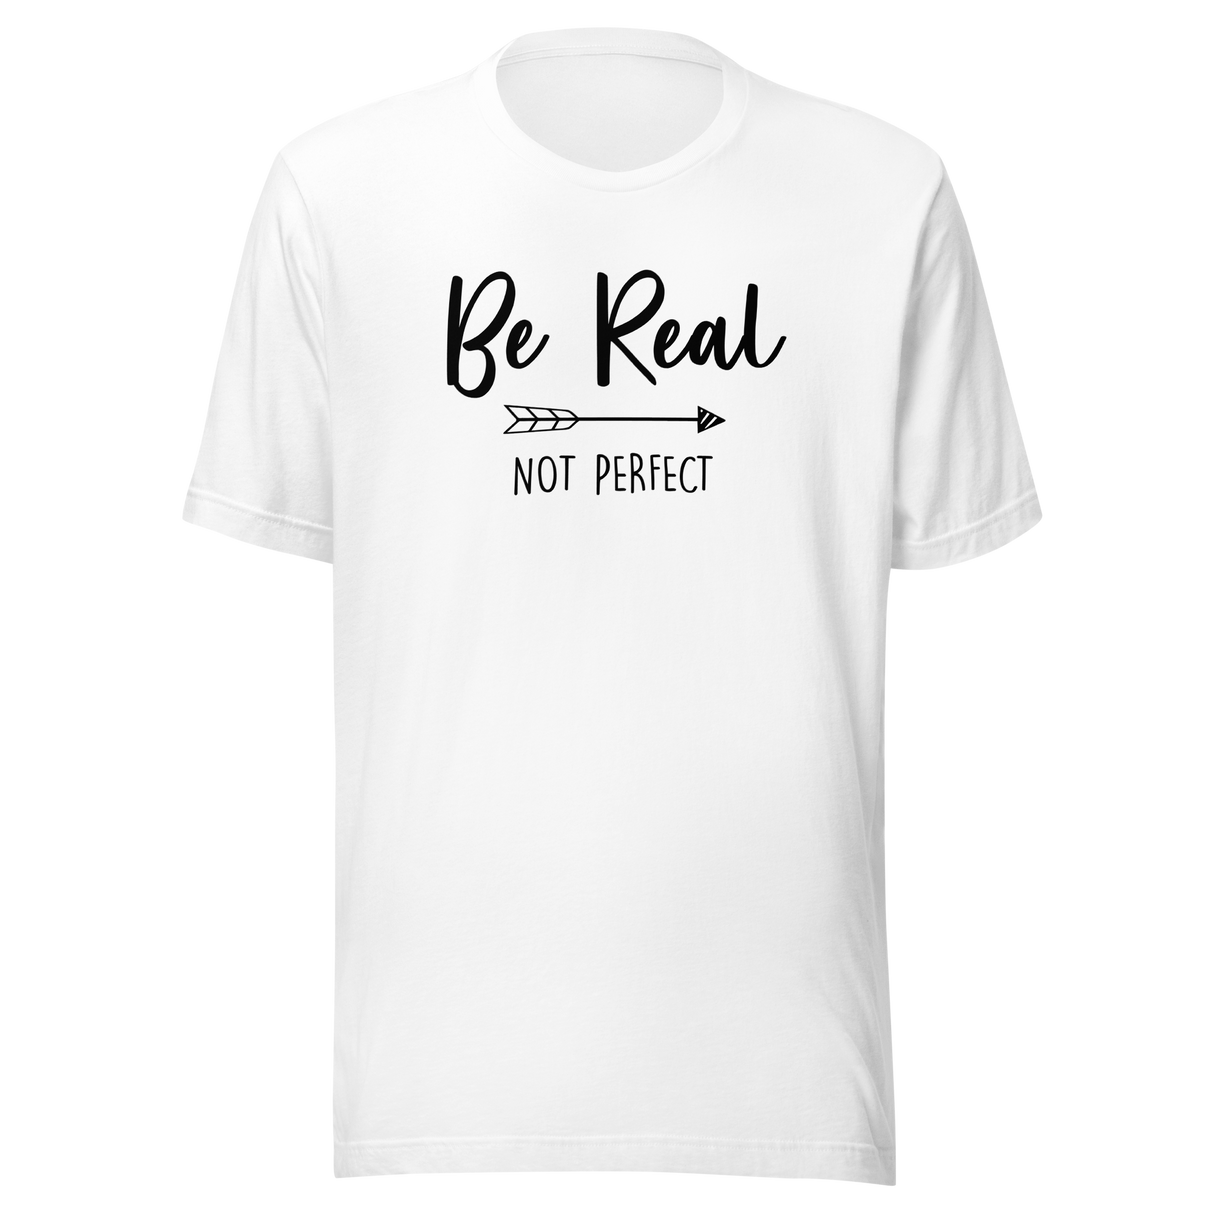 be-real-not-perfect-be-real-tee-perfect-t-shirt-inspirational-tee-t-shirt-tee#color_white